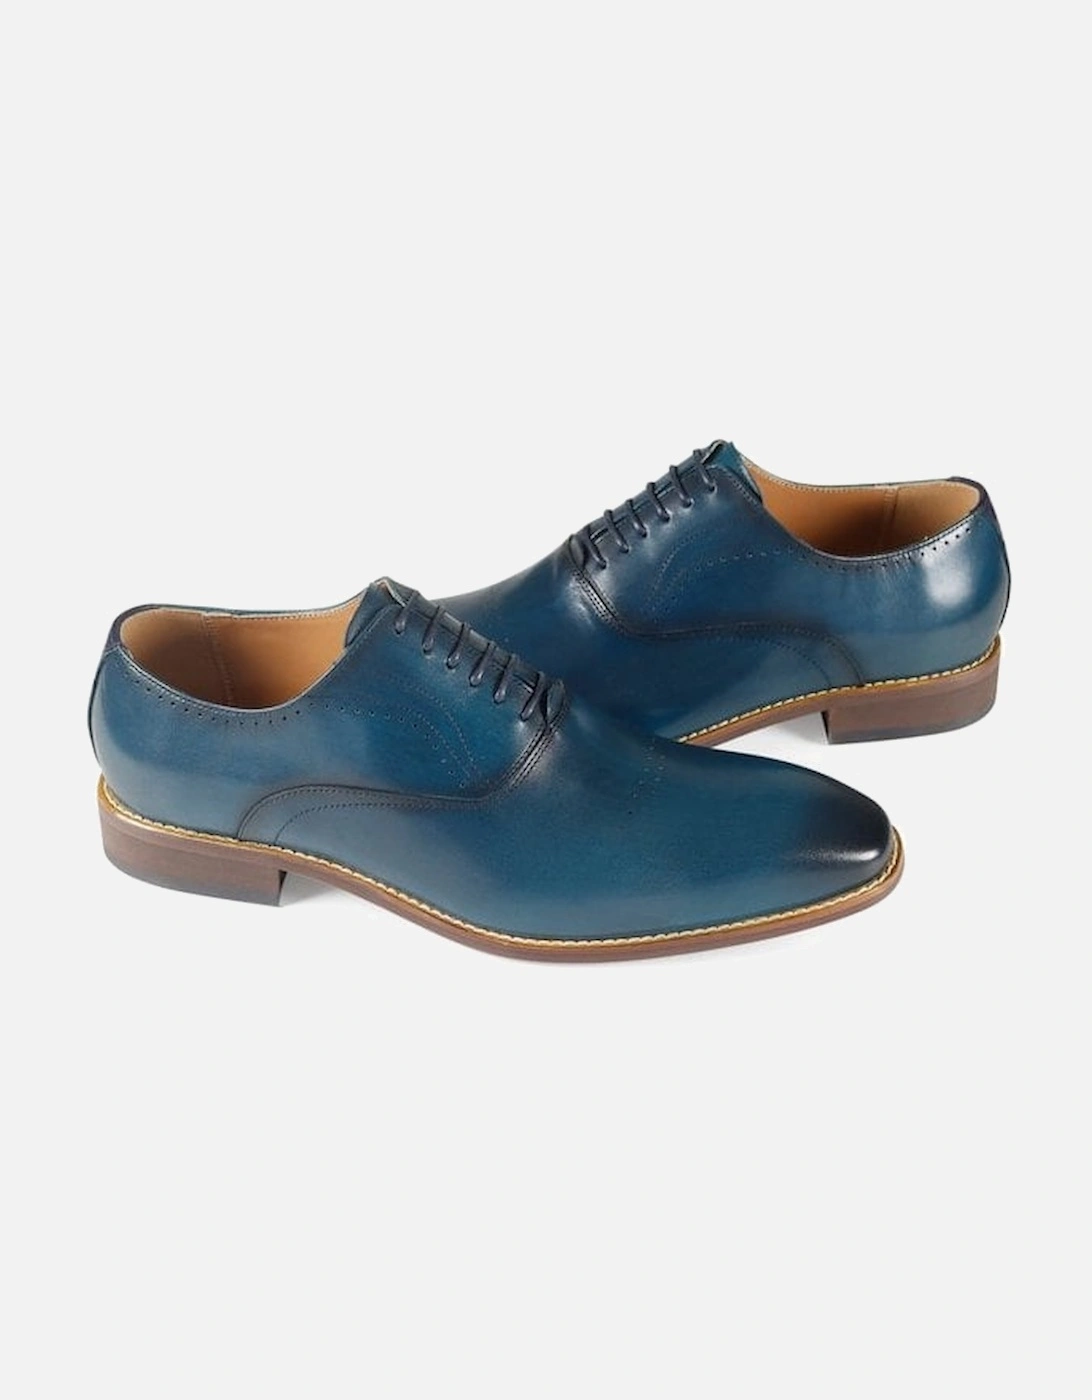 Pompei Derby Shoes - Navy